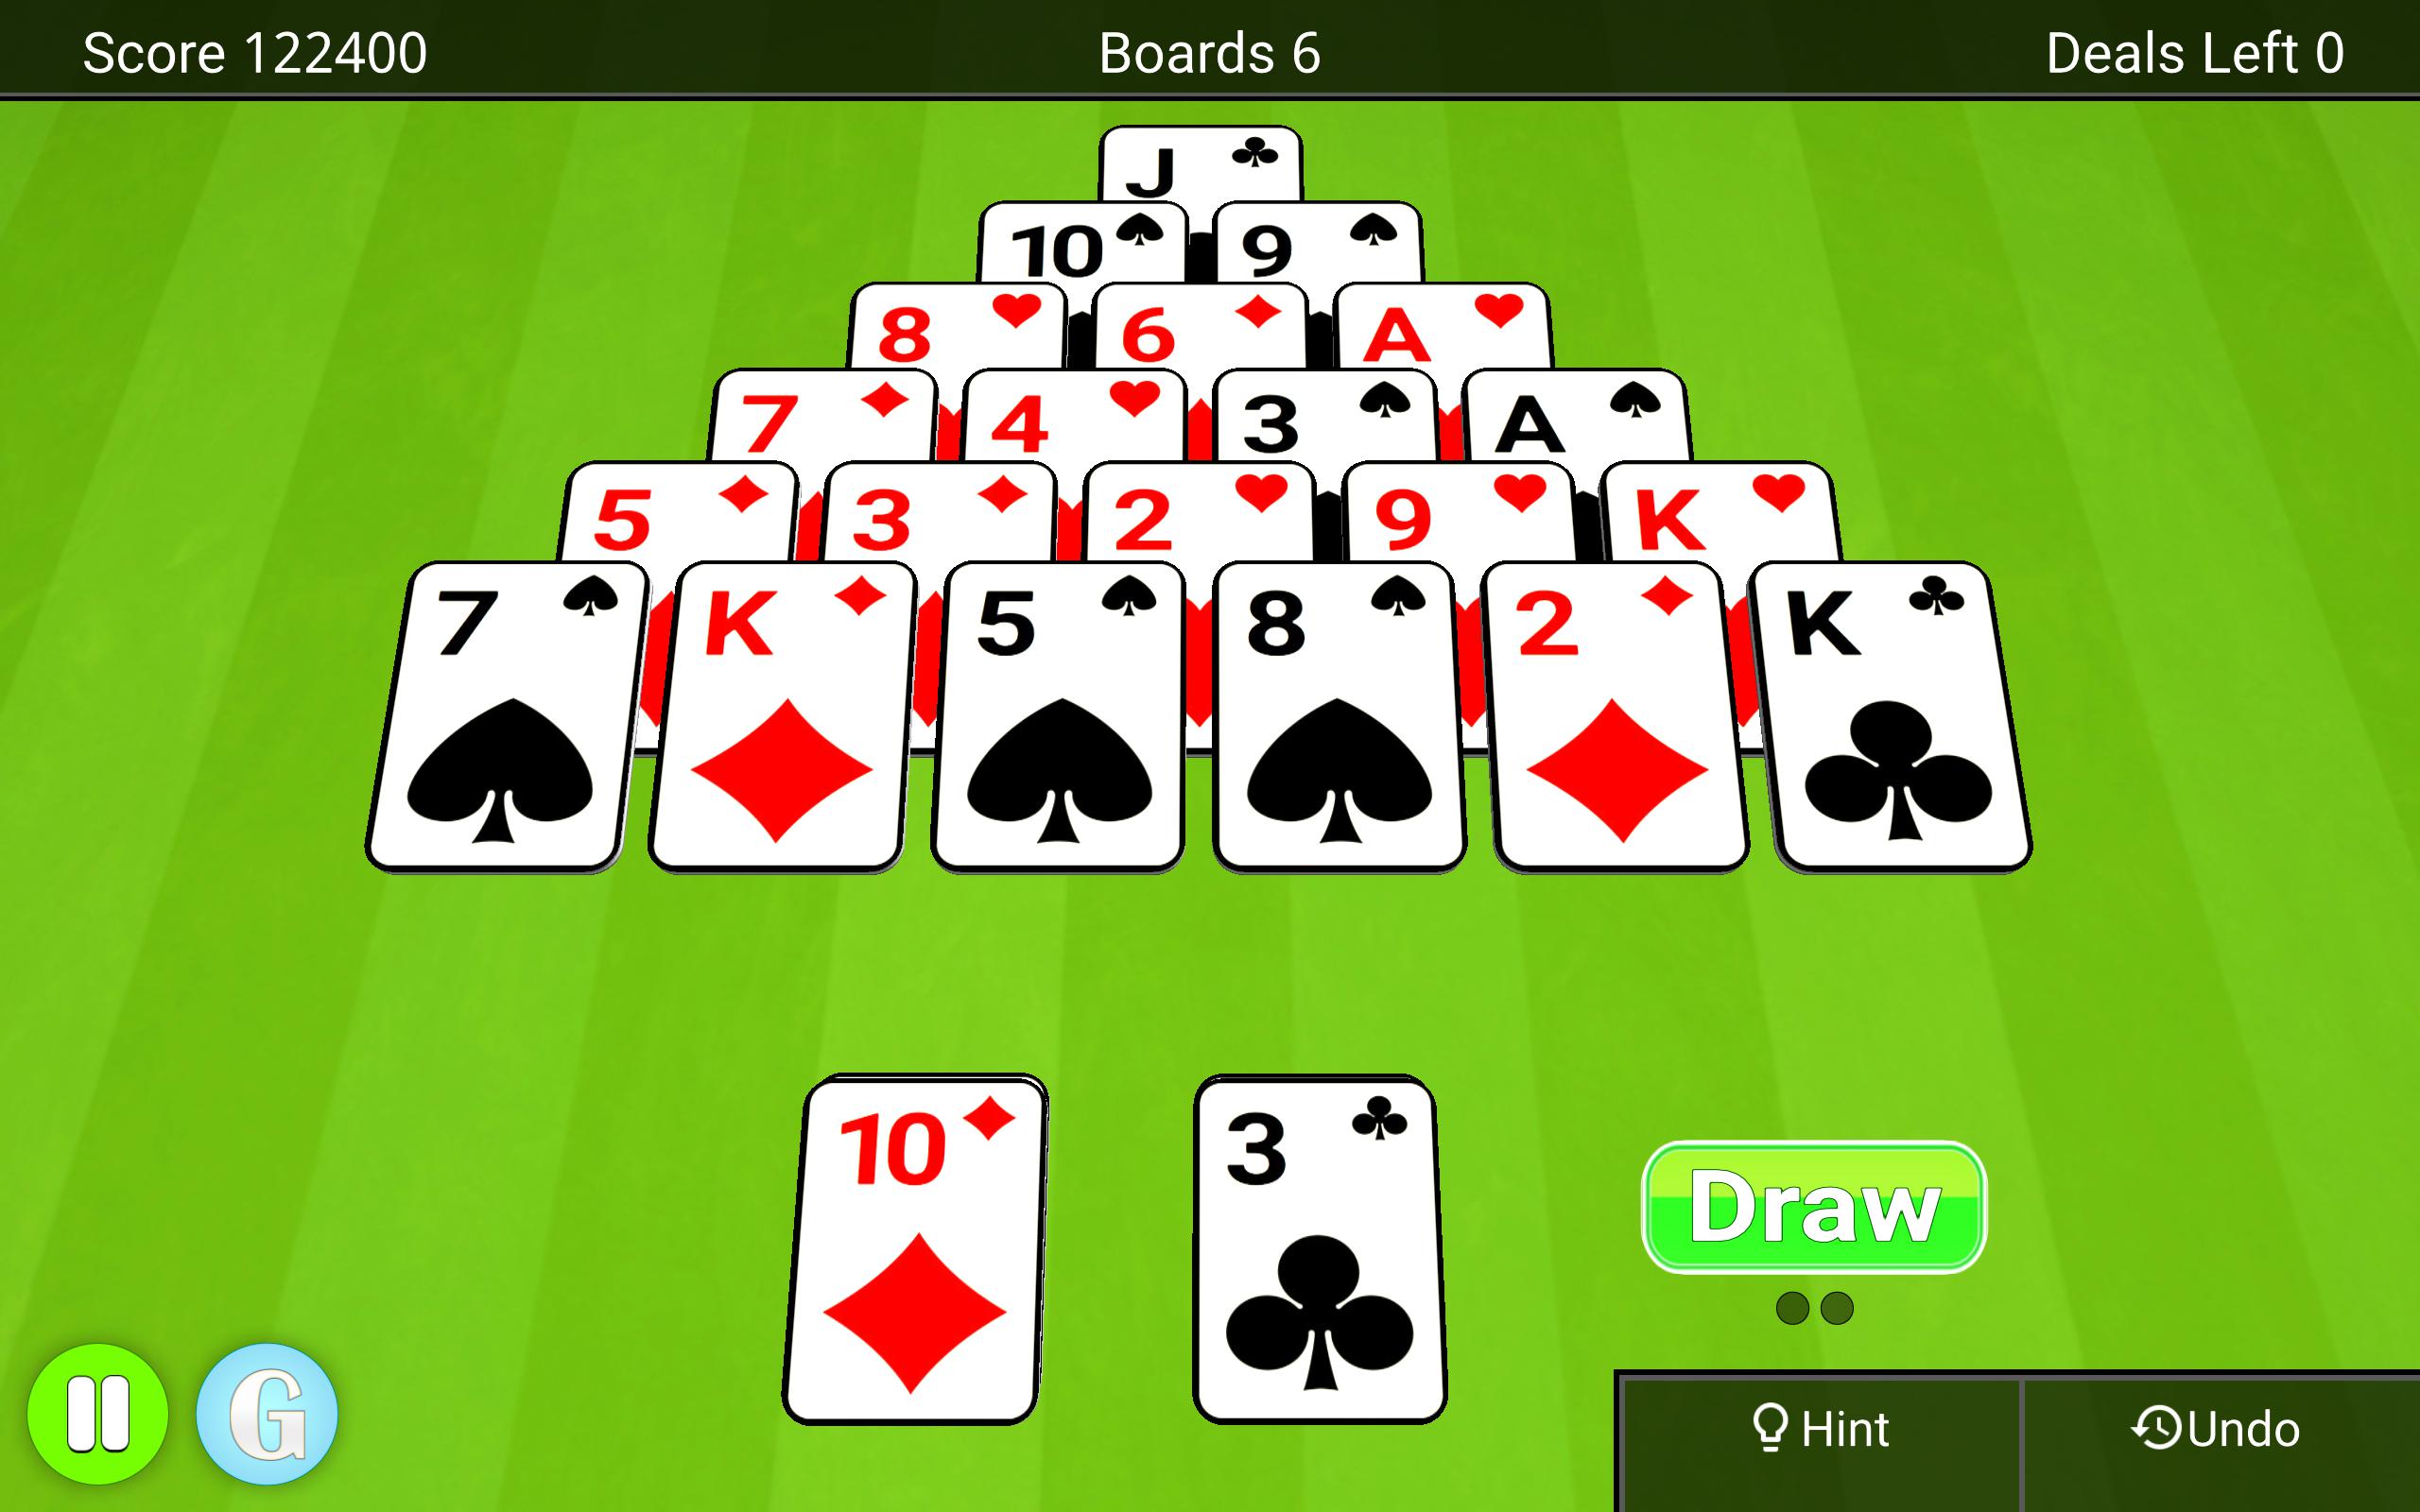 play free pyramid solitaire online